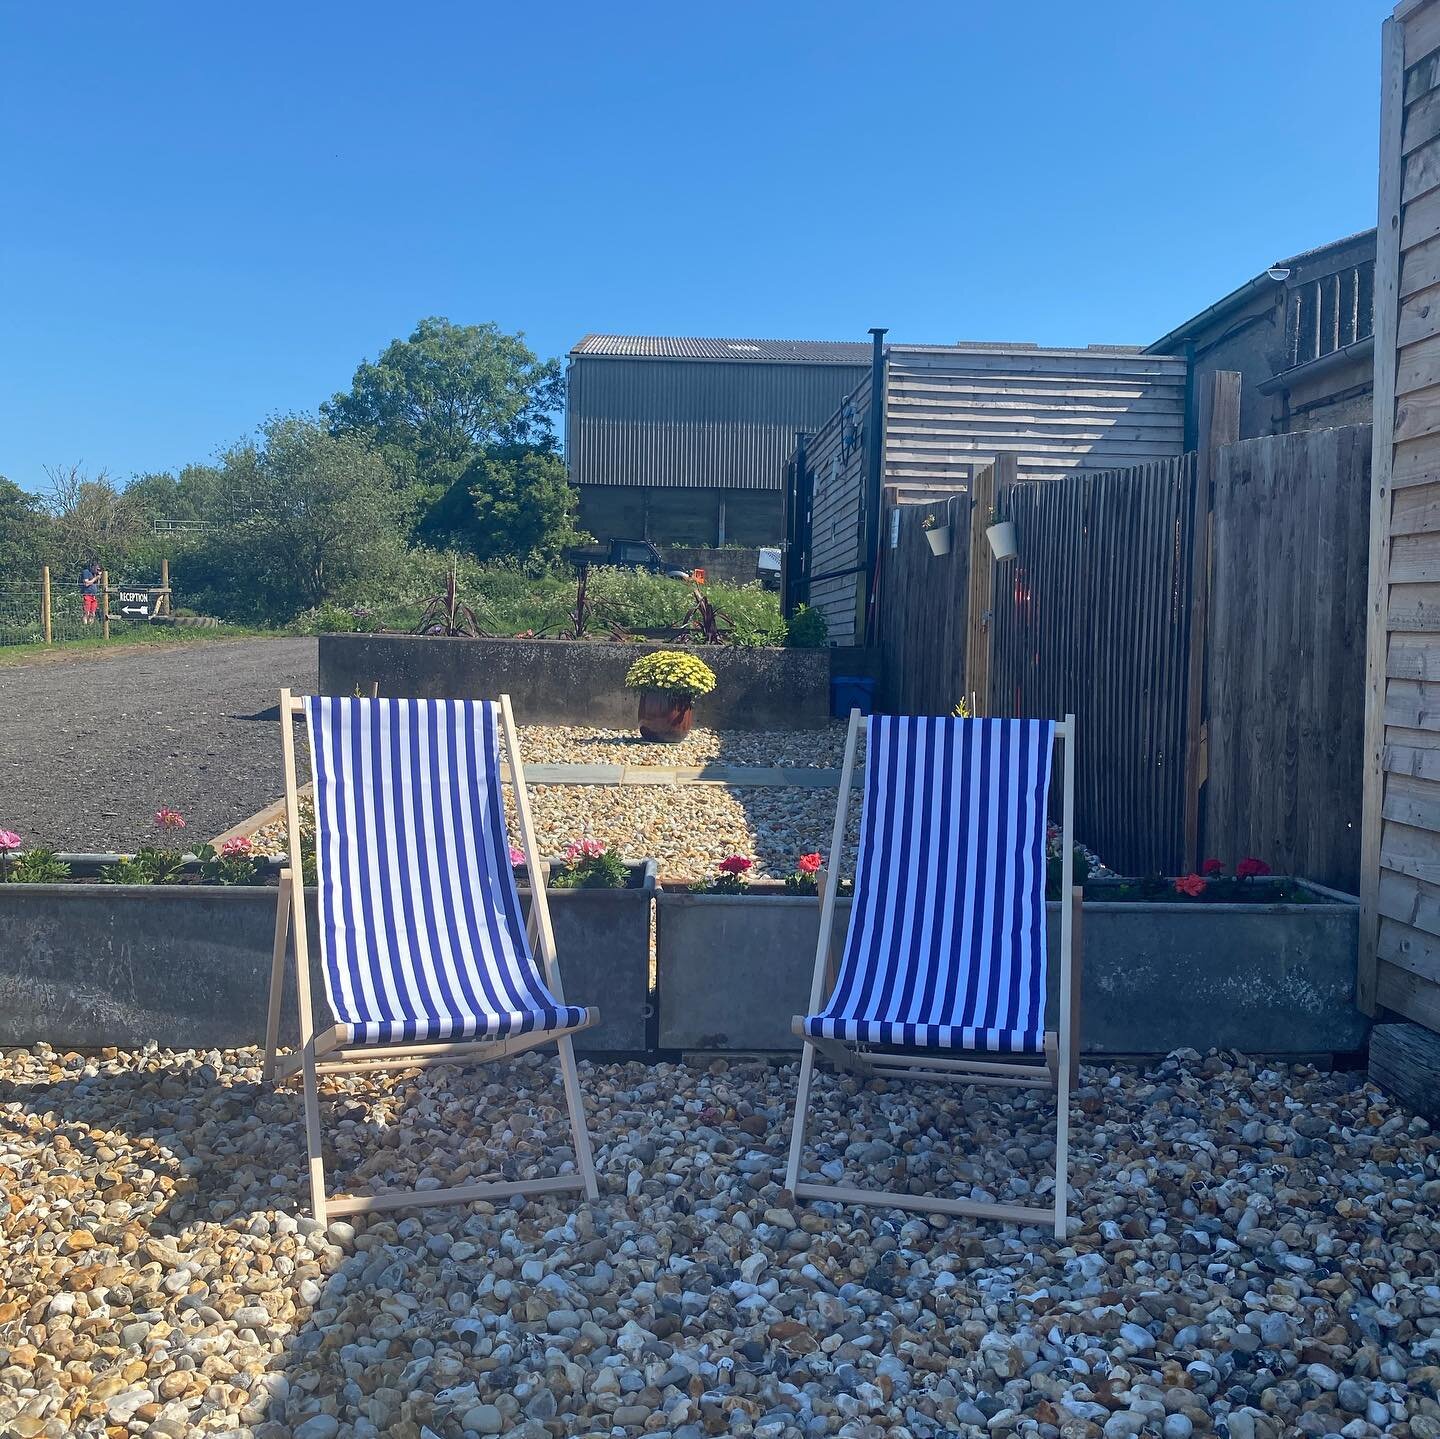 Oh I do like to be beside the seaside 🏖

How cute is our little pebble beach area by reception? The perfect spot to soak up some sun and gaze out onto the rolling hills of the farm. 

In other news, it&rsquo;s been a very busy weekend here at Chalky